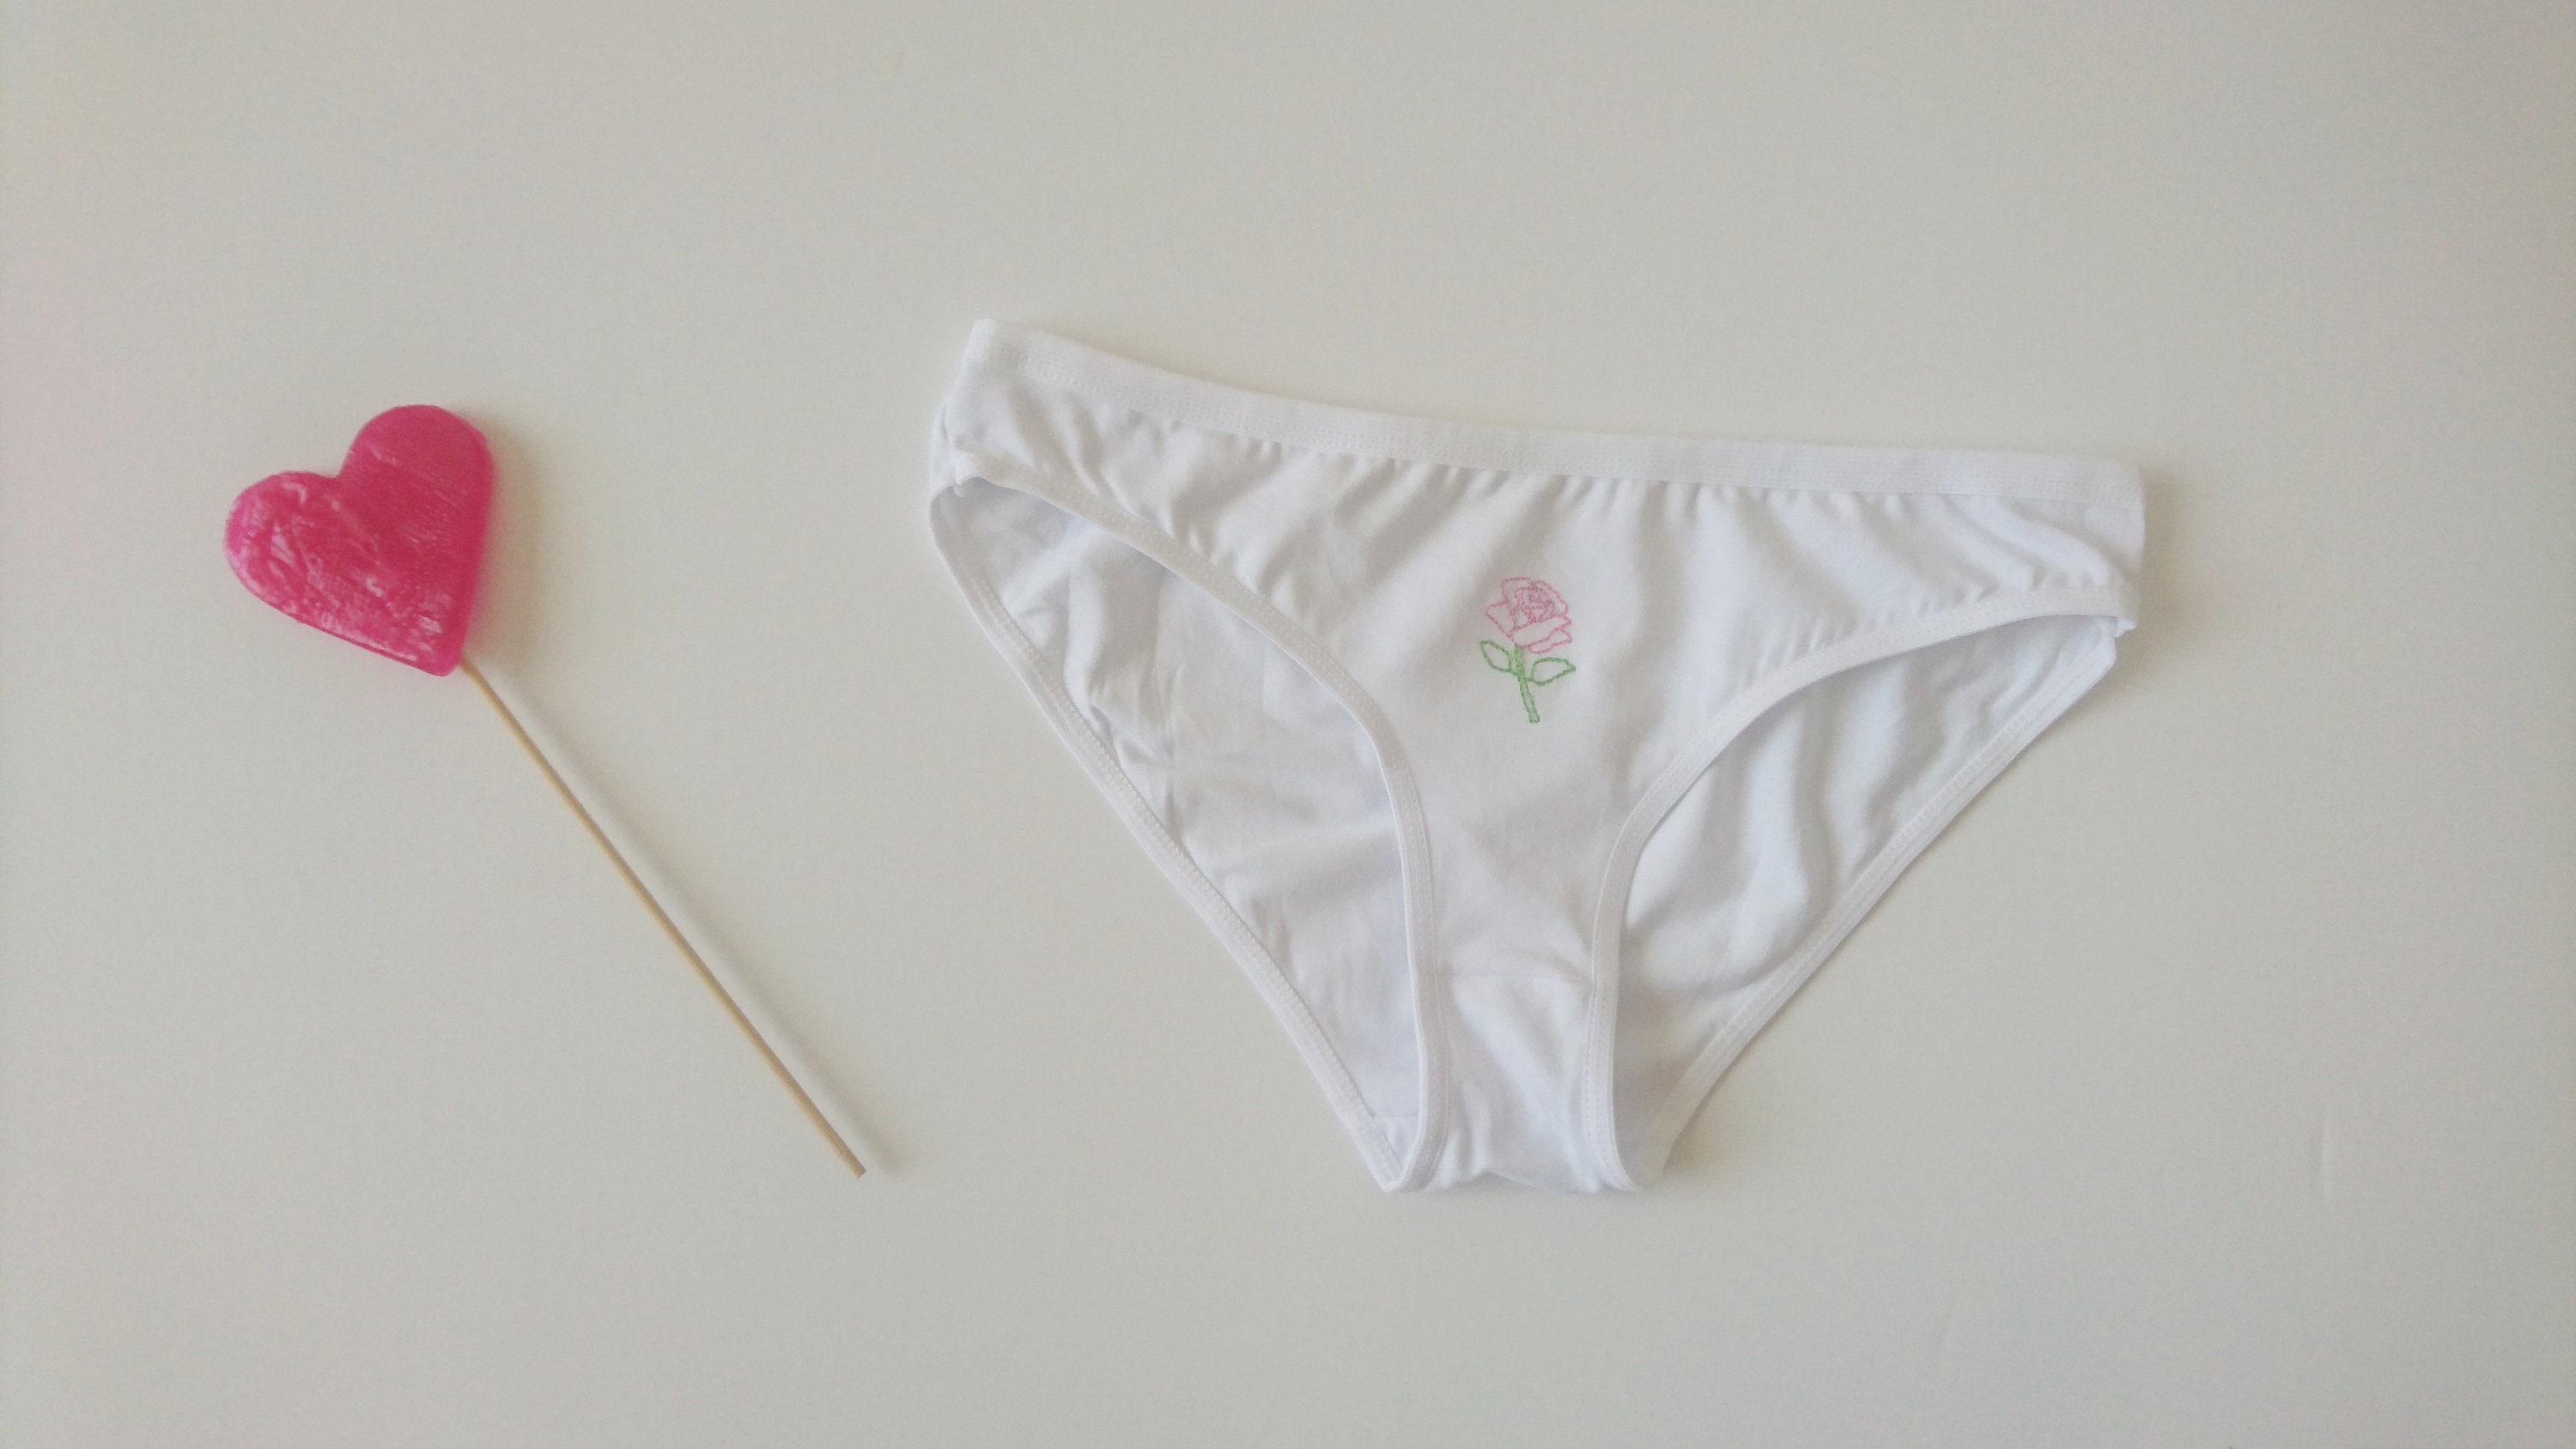 Pink Rose Panties Hand Embroidered Panties White Cotton Underwear Hand  Embroidered Rose Funny Bikini Panties Made to Order 